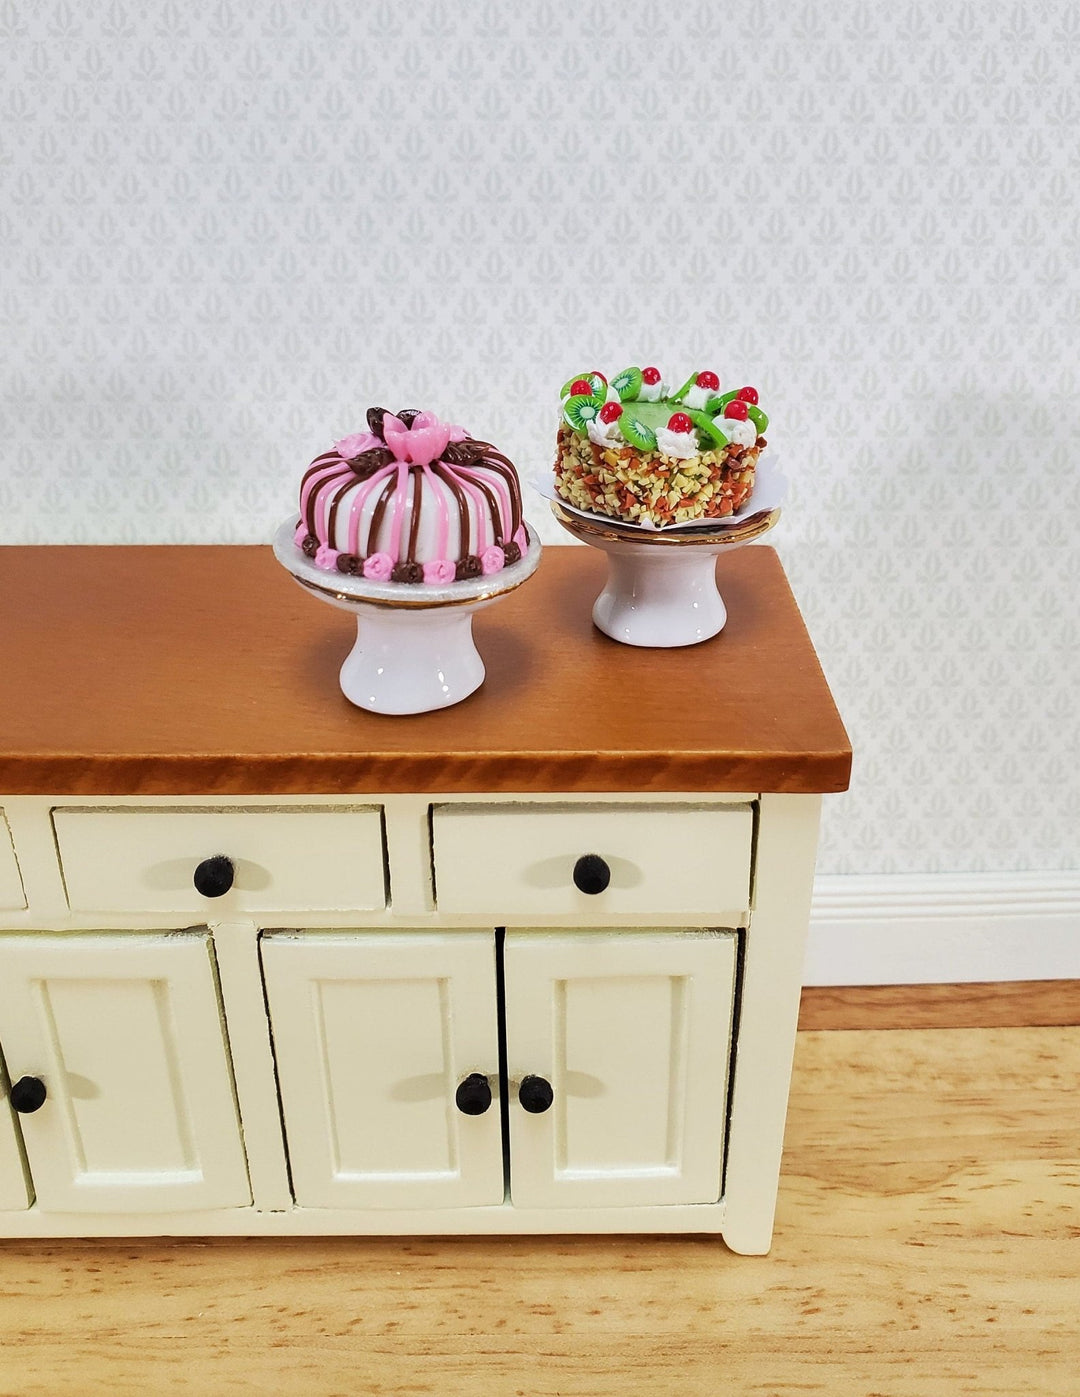 Dollhouse Cake Stands Plates Set of 2 Ceramic Pink & Gold 1:12 Scale Miniatures - Miniature Crush